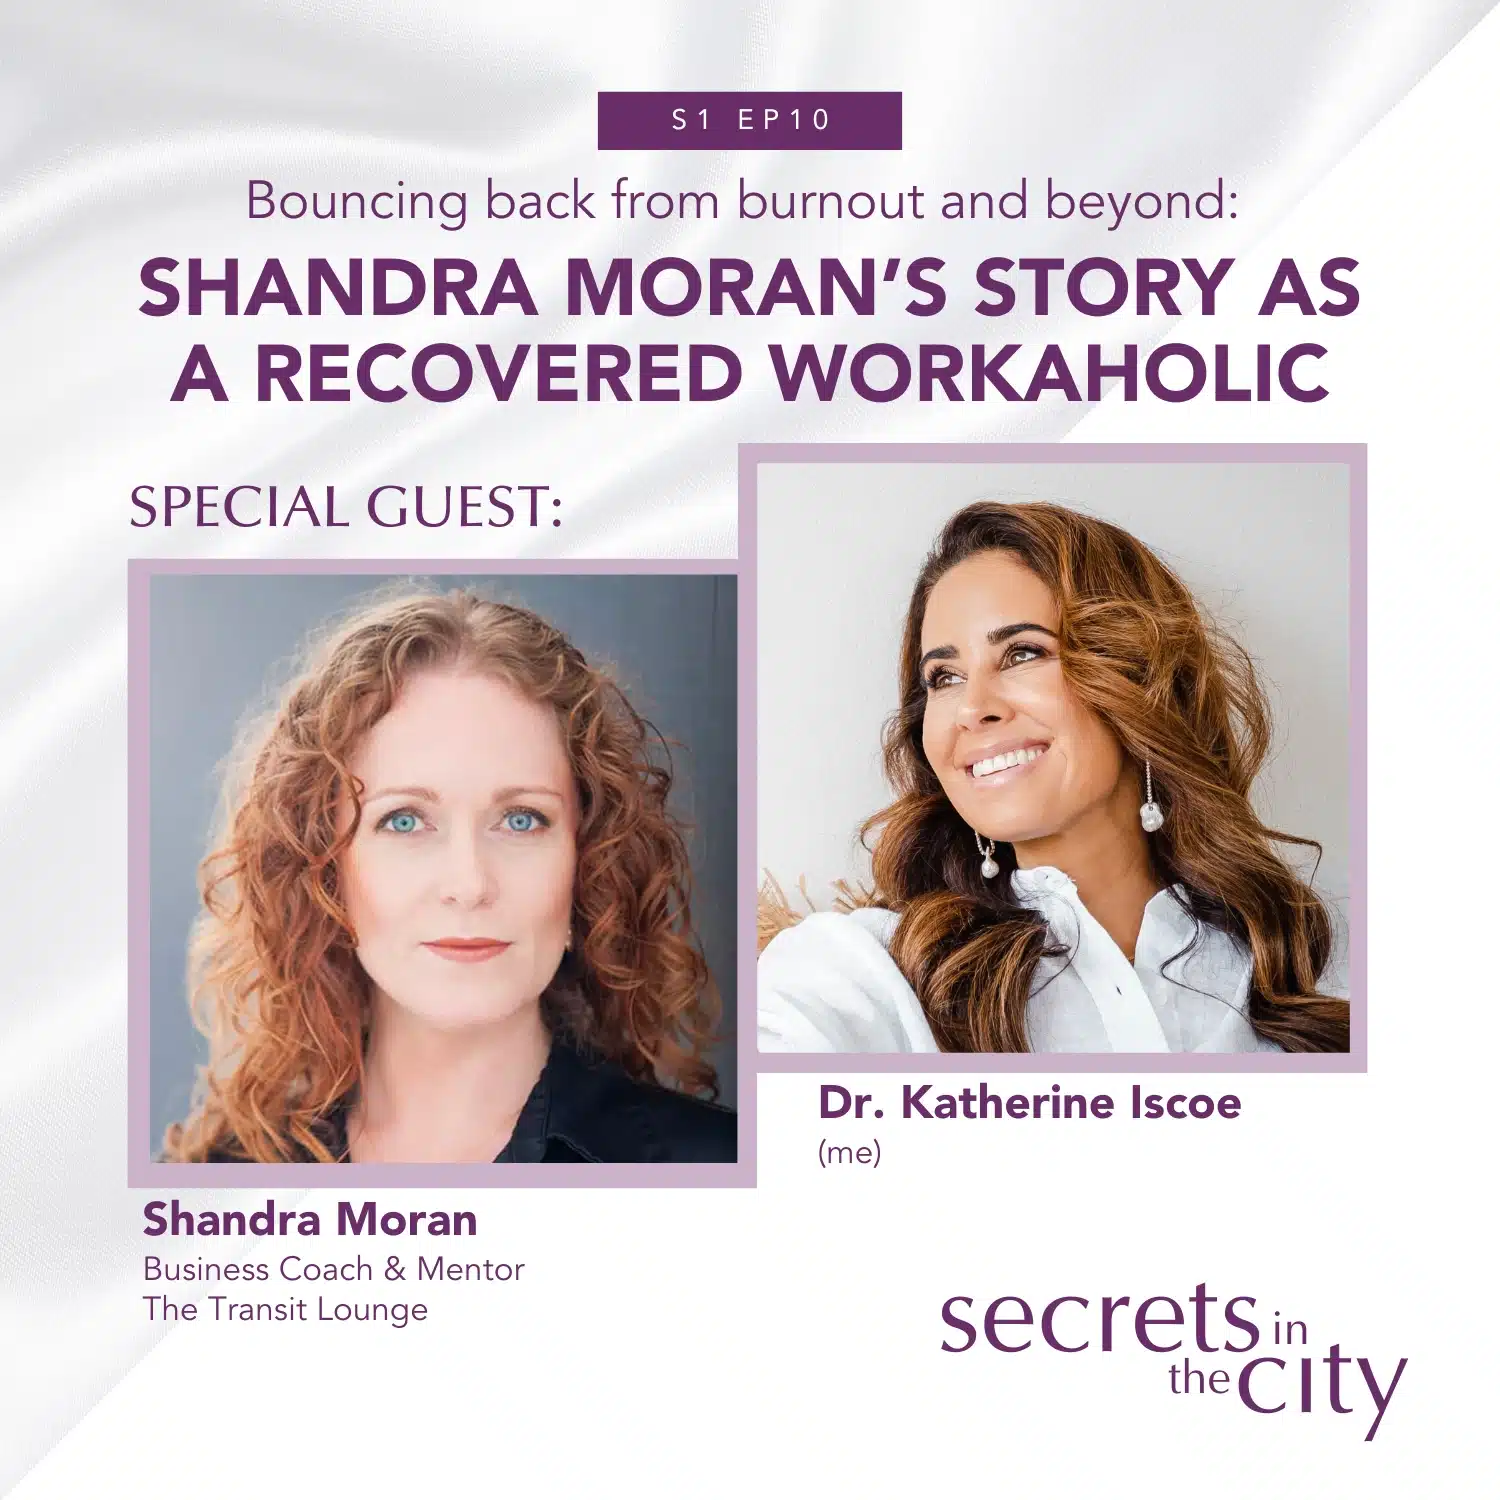 Bouncing back from burnout and beyond - Secrets in the City podcast cover featuring photos of Shandra Moran and Dr. Katherine Iscoe